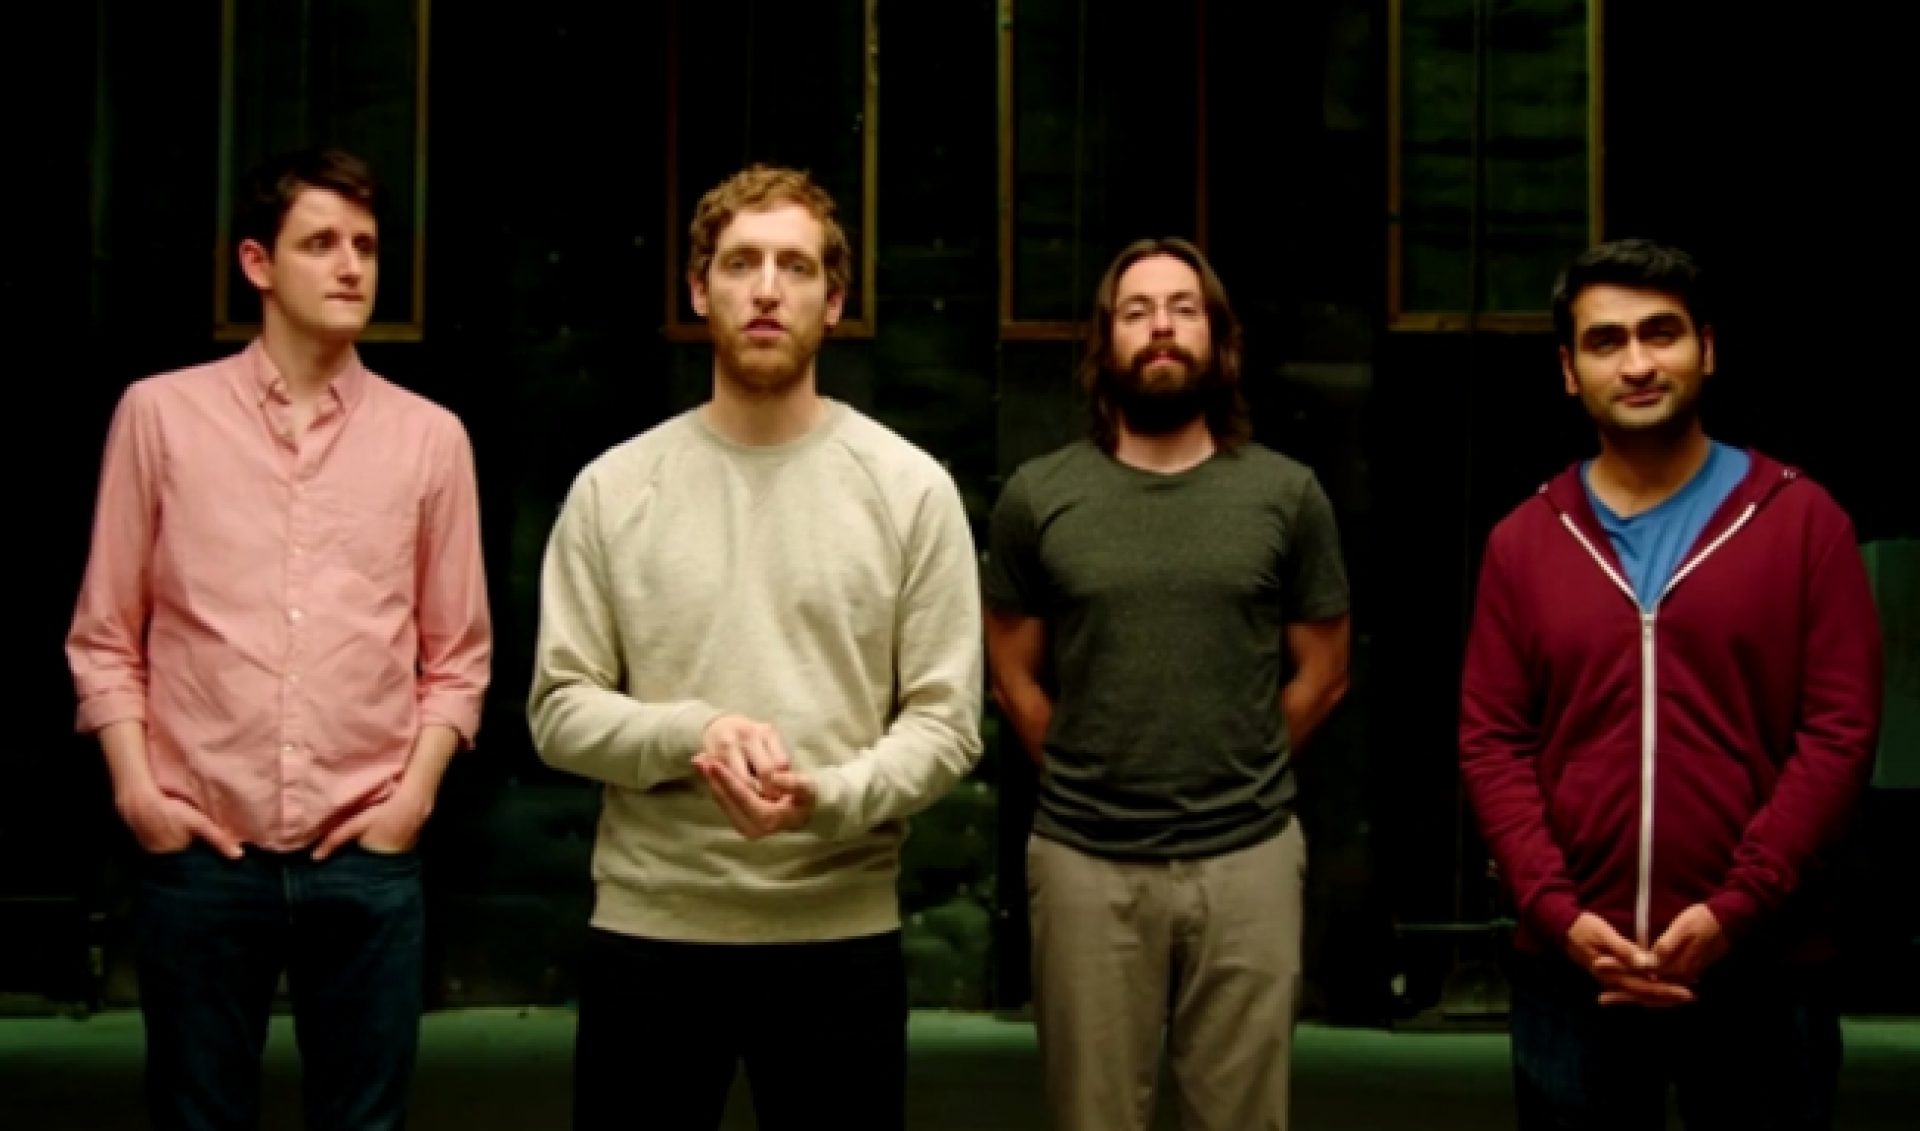 First Episode Of HBO’s ‘Silicon Valley’ To Be Broadcast On Twitch